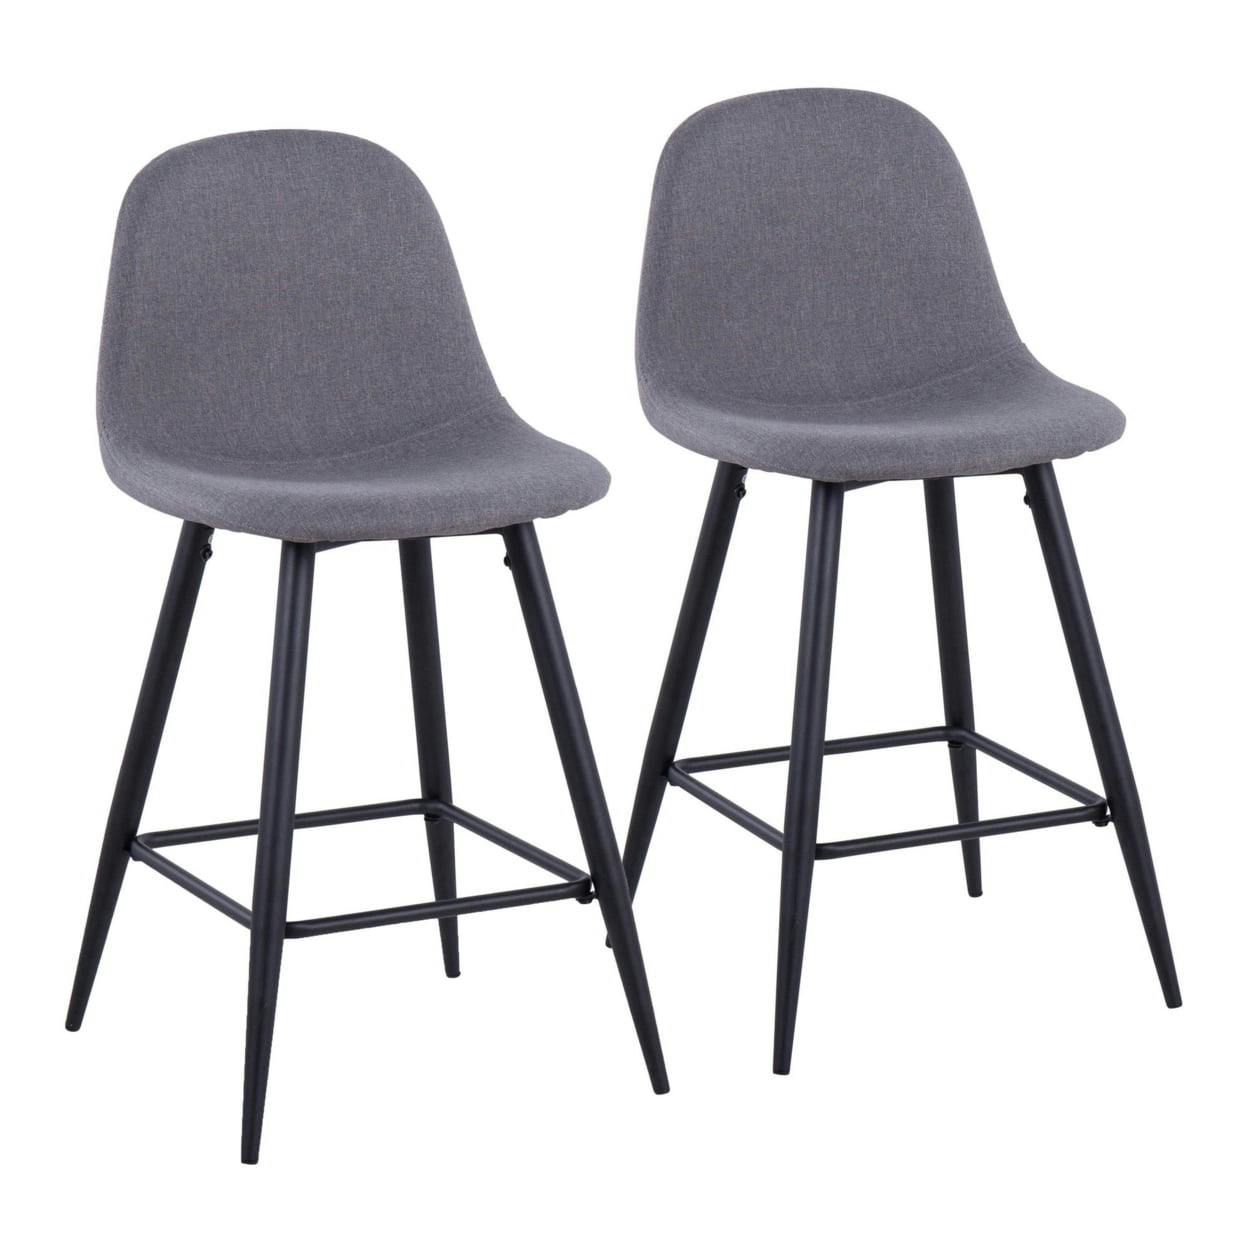 Mid-Century Modern Charcoal Fabric Counter Stools, Set of 2